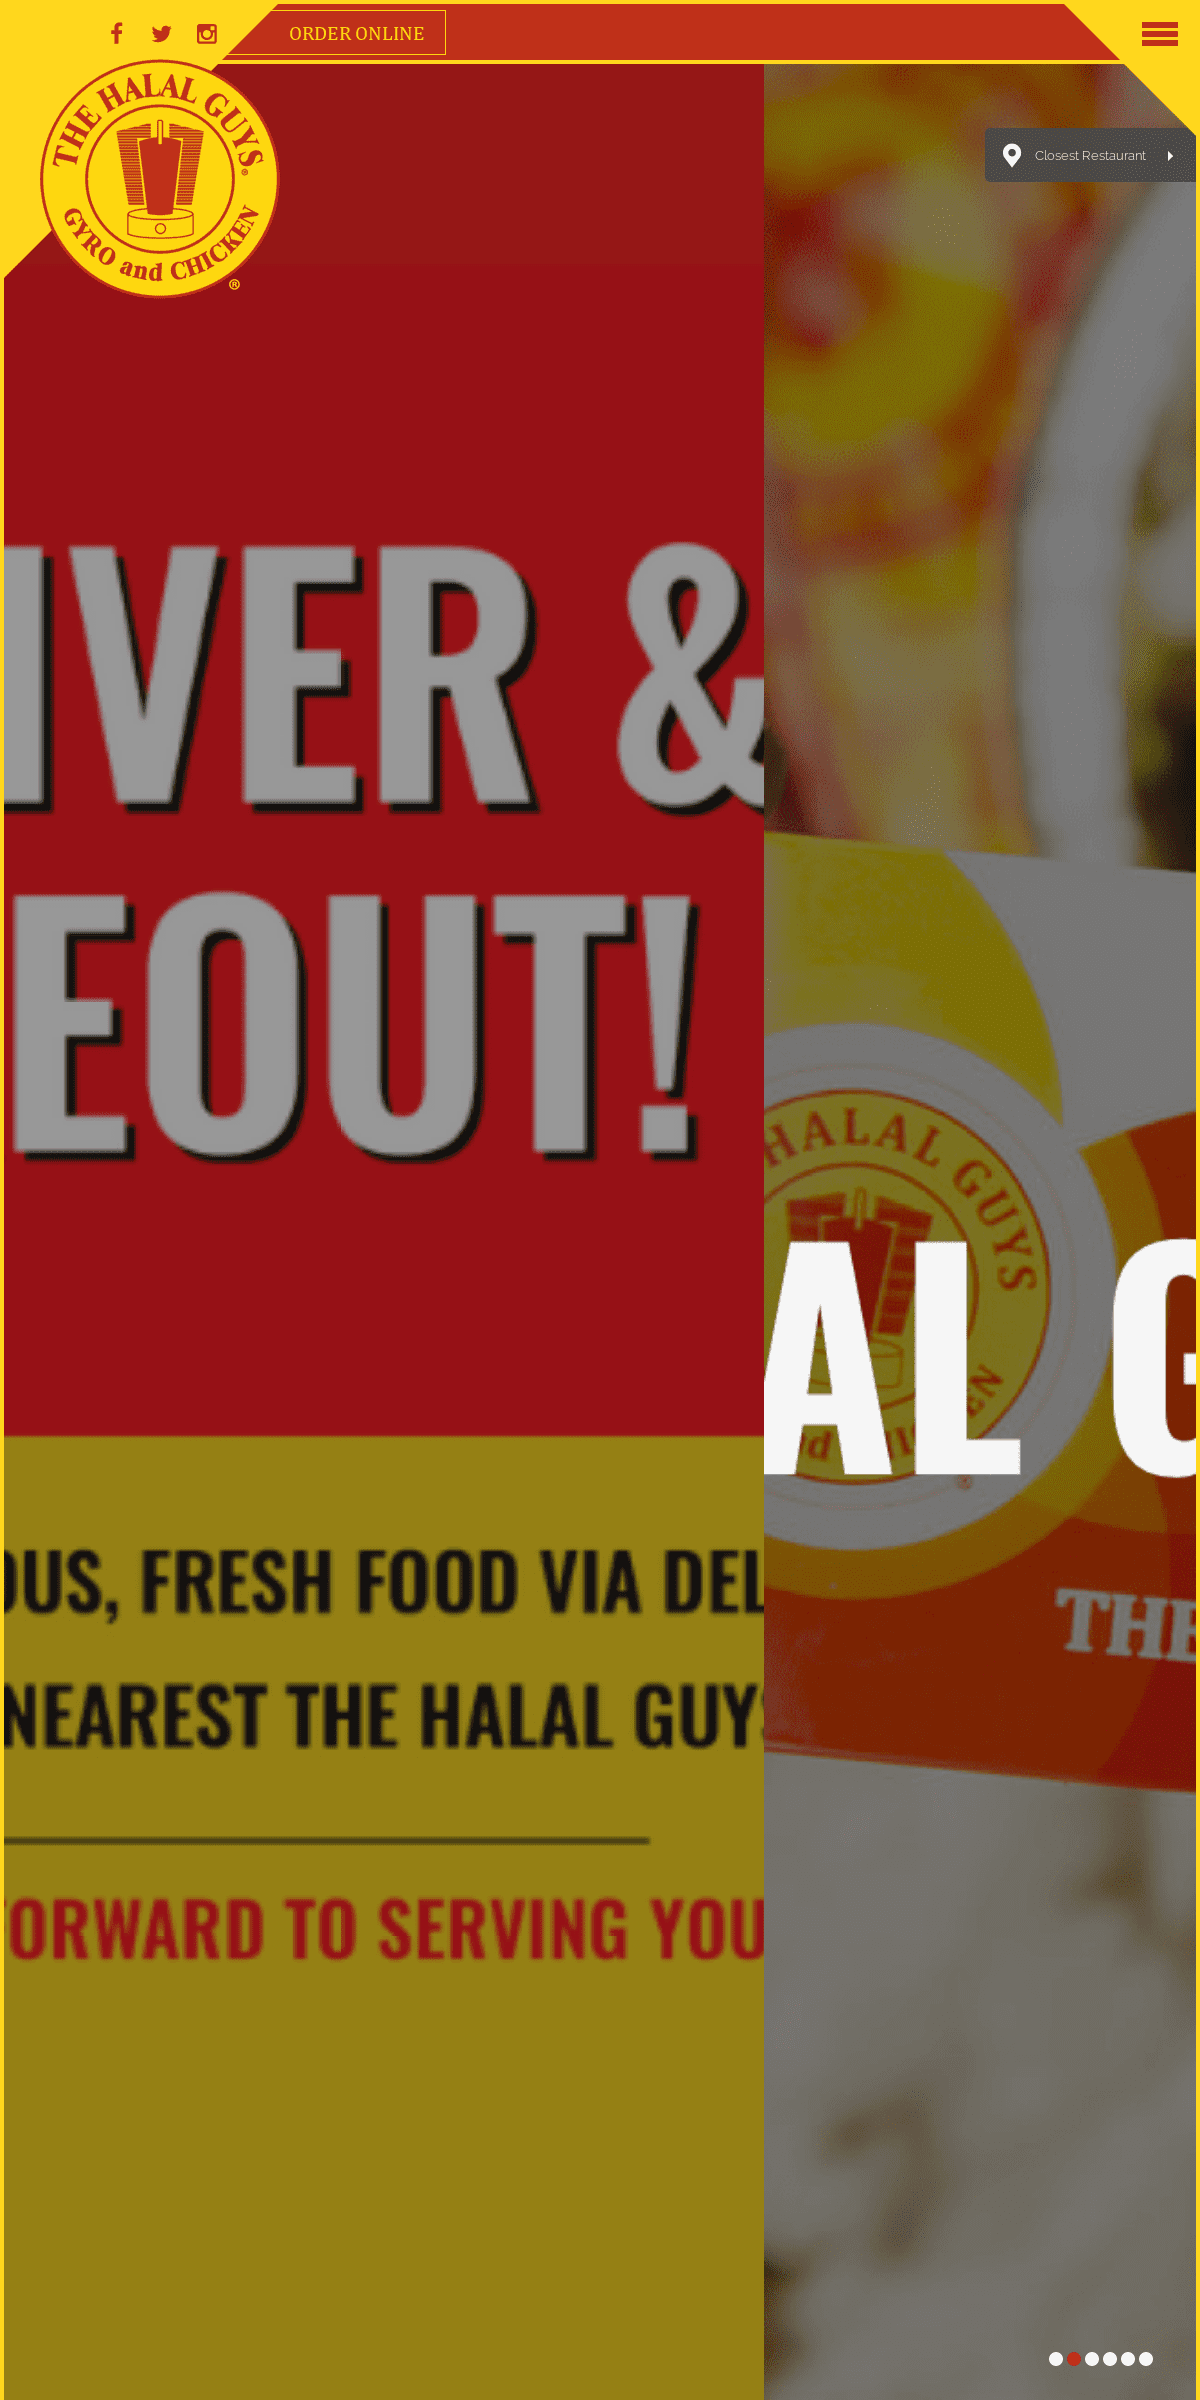 A complete backup of thehalalguys.com